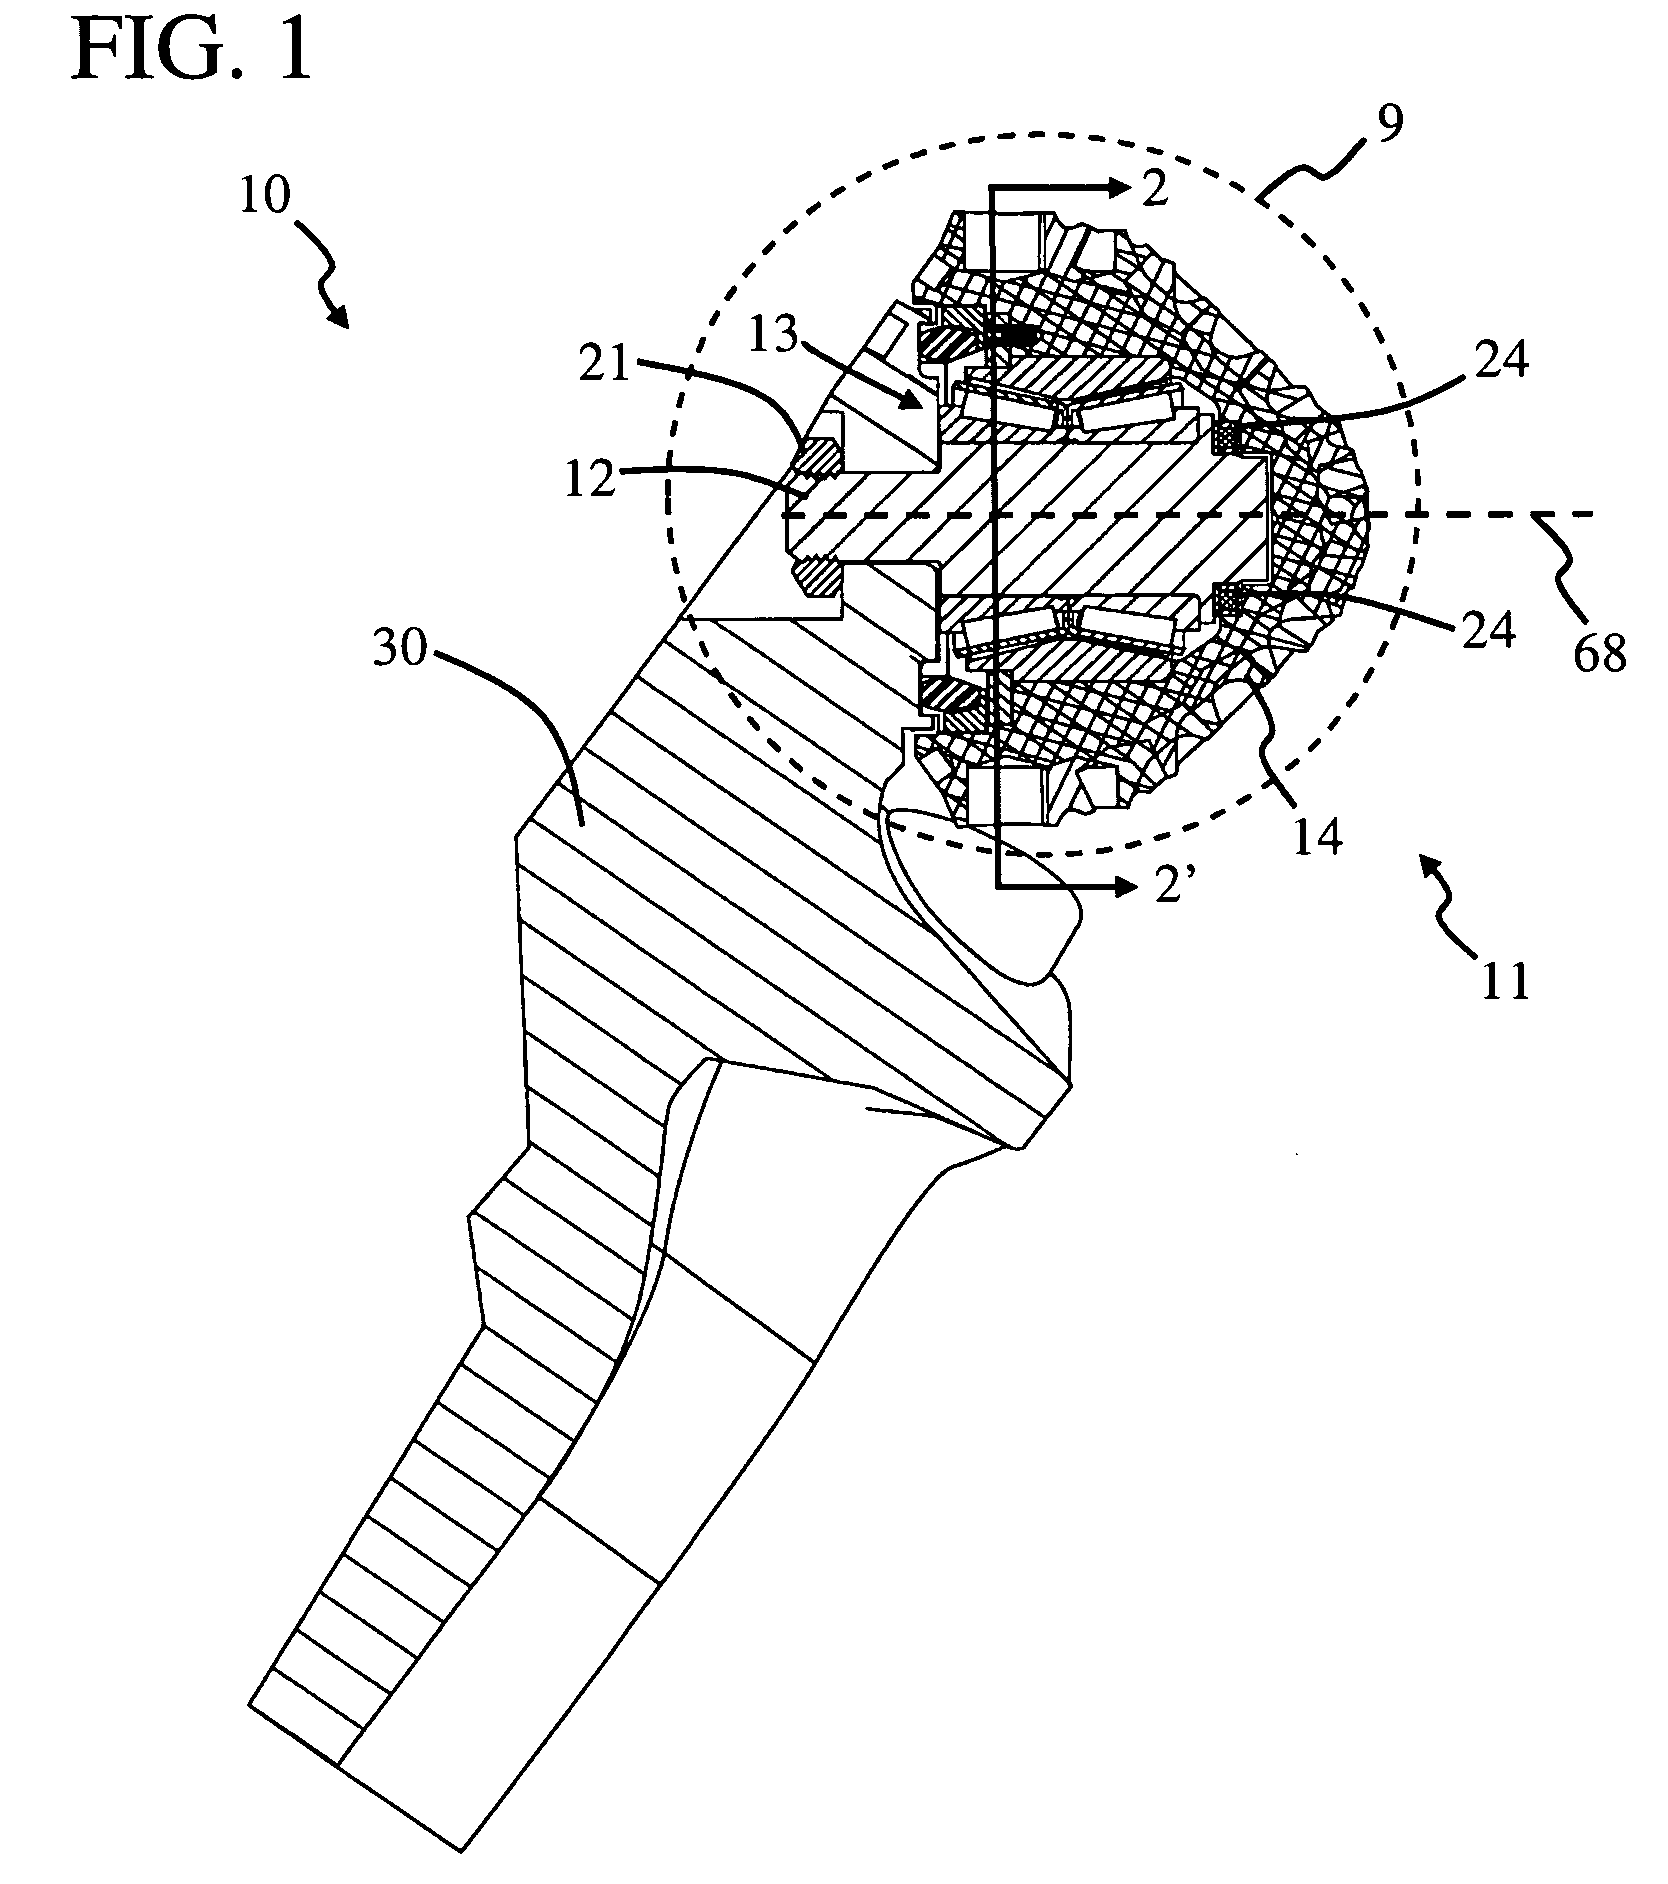 Earth bit with hub and thrust units